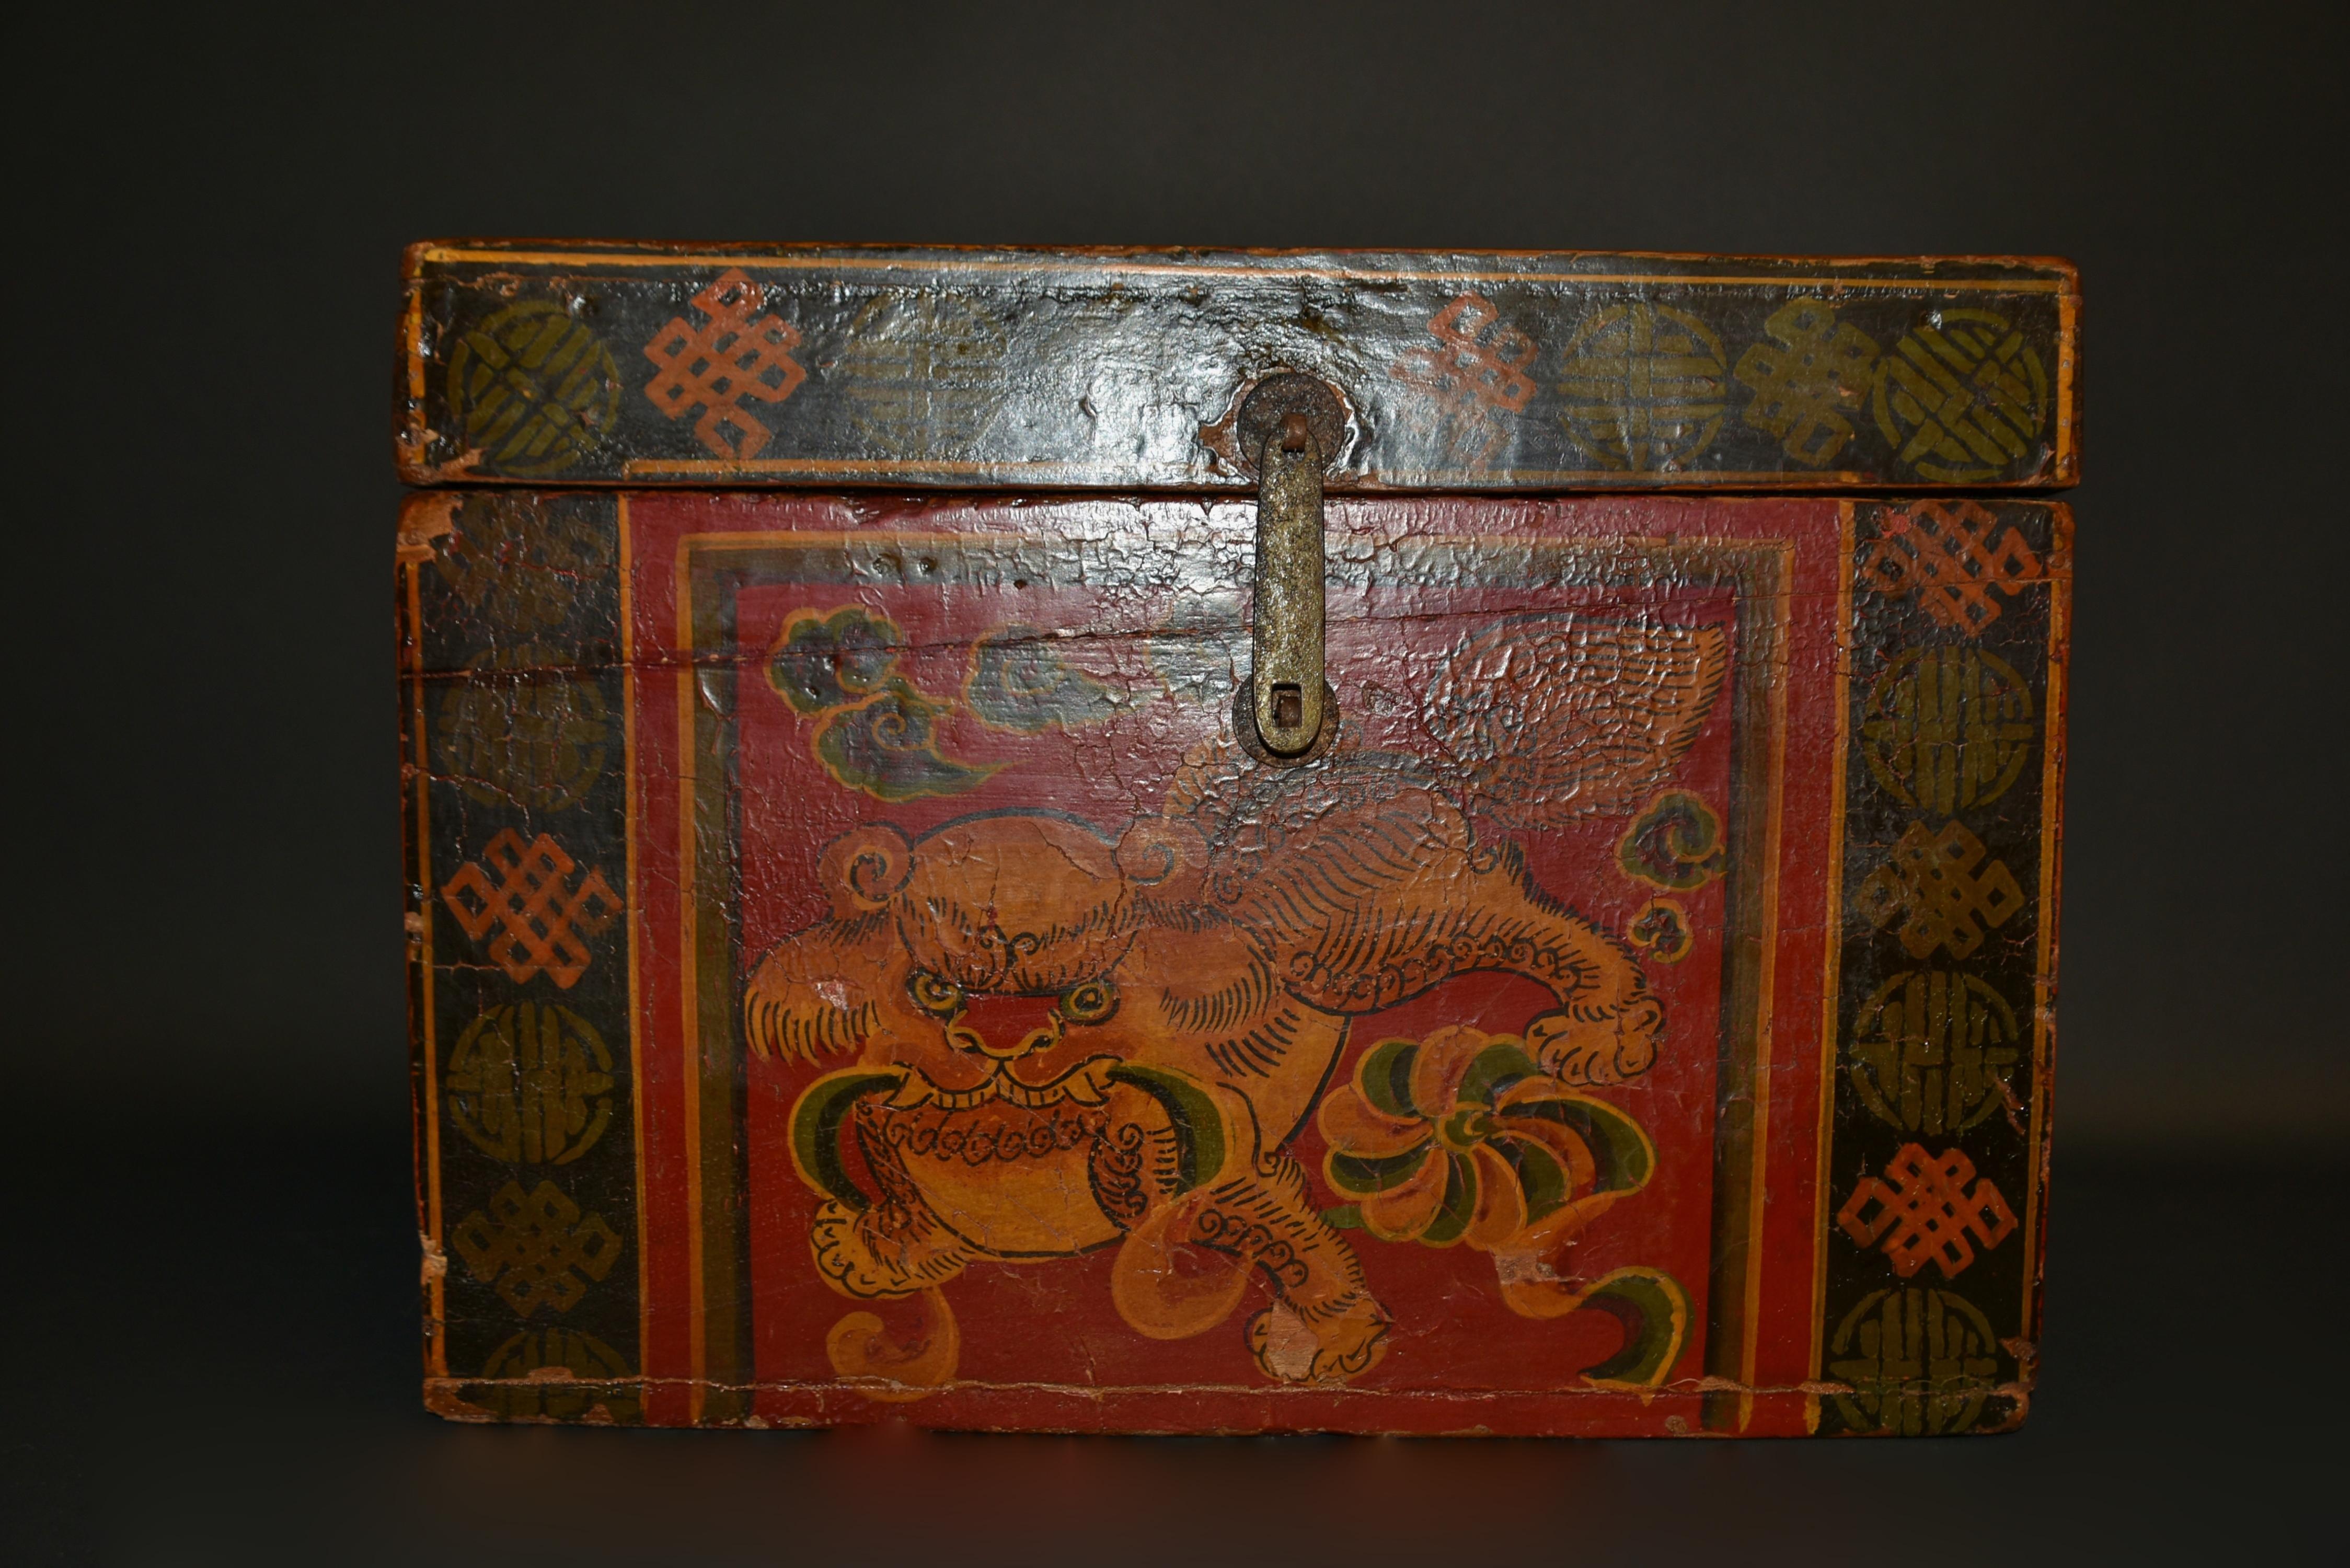 One of our most adorable foo dogs among our limited antique 19th century foo dog box collection. The large head with big innocent eyes and red lips is framed by curled mane. Fleshy paws pressing into the ground, firmly holding a waving ribbon. A